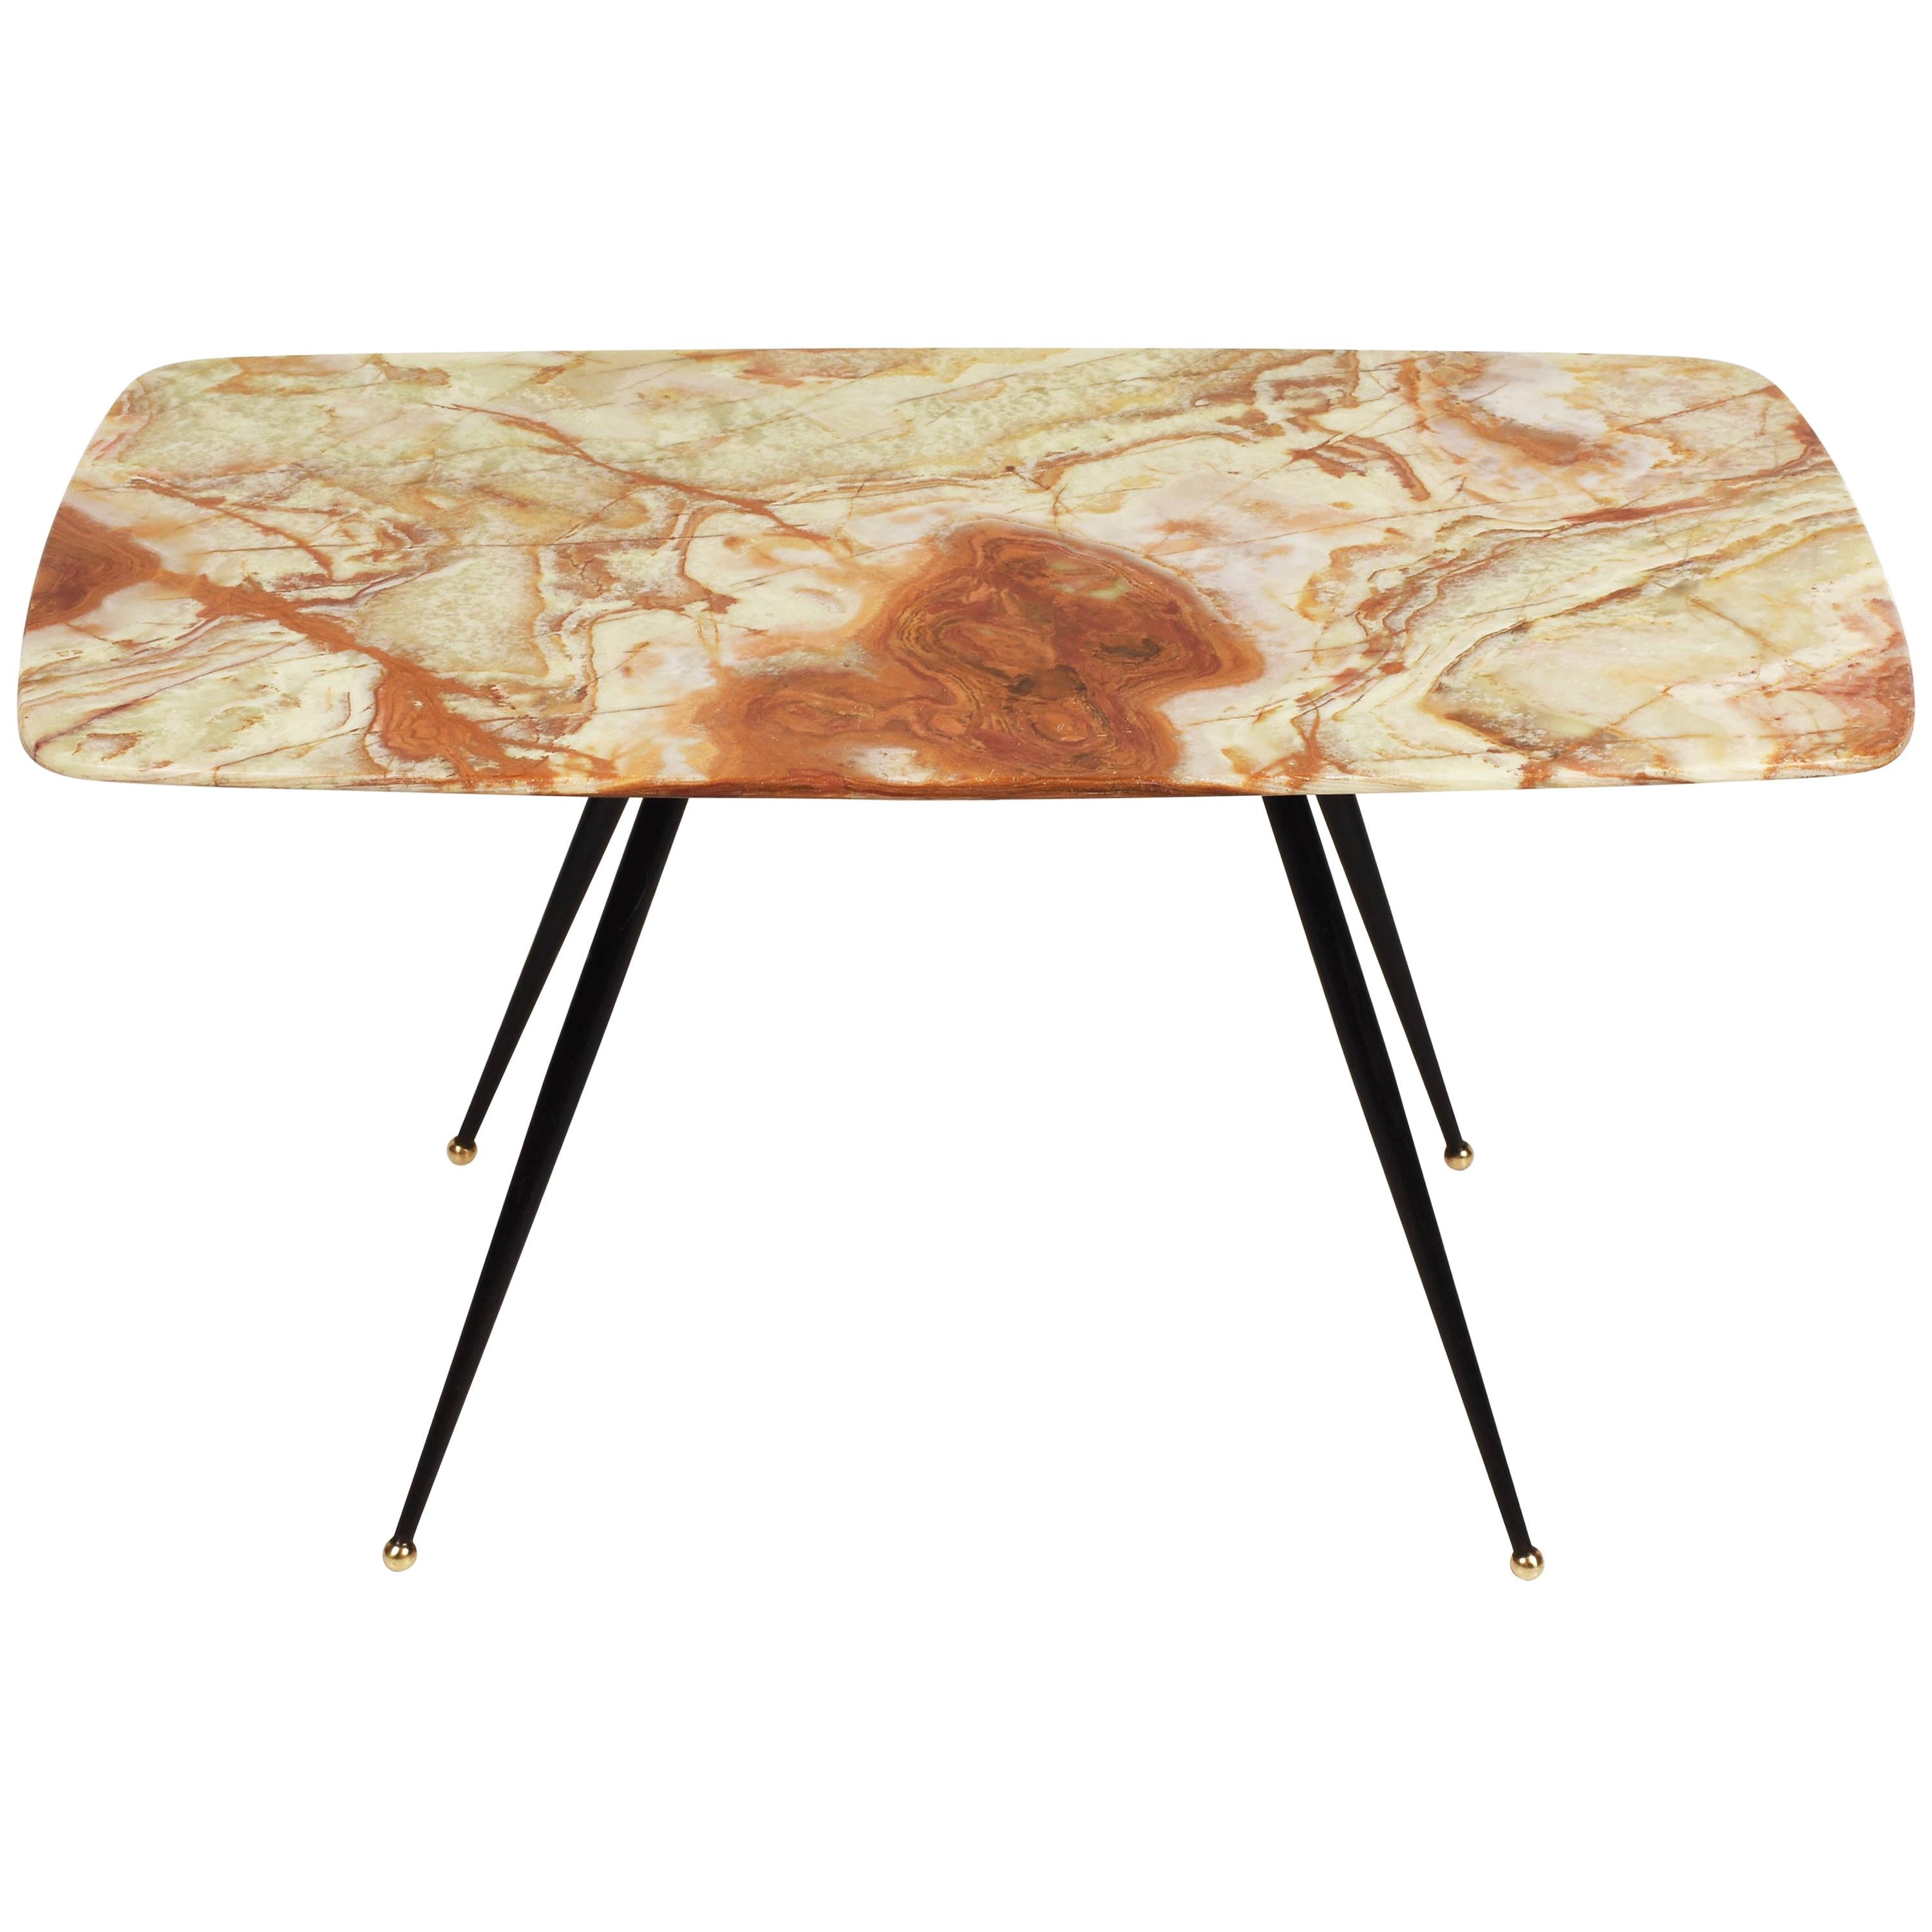 Midcentury Pink and Green Onyx Marble Italian Coffee Table with Brass Feet 1950s